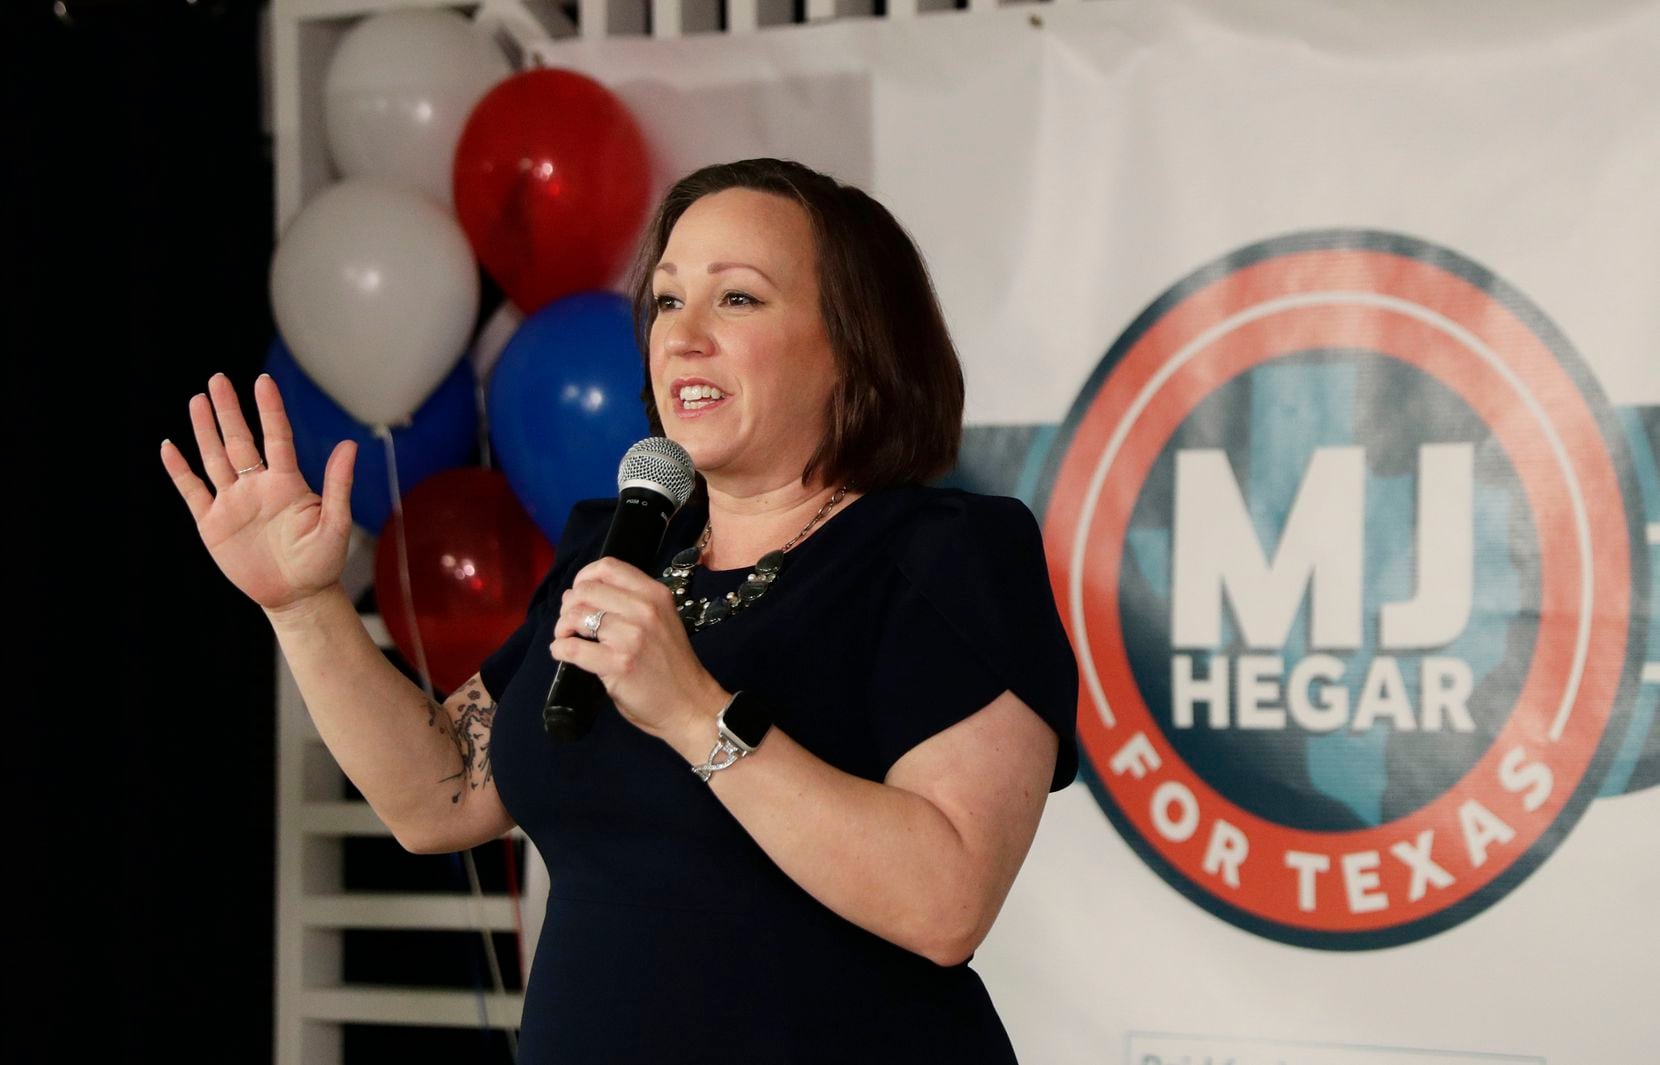 Democratic U.S. Senate candidate MJ Hegar has used the issue of the courts to criticize...